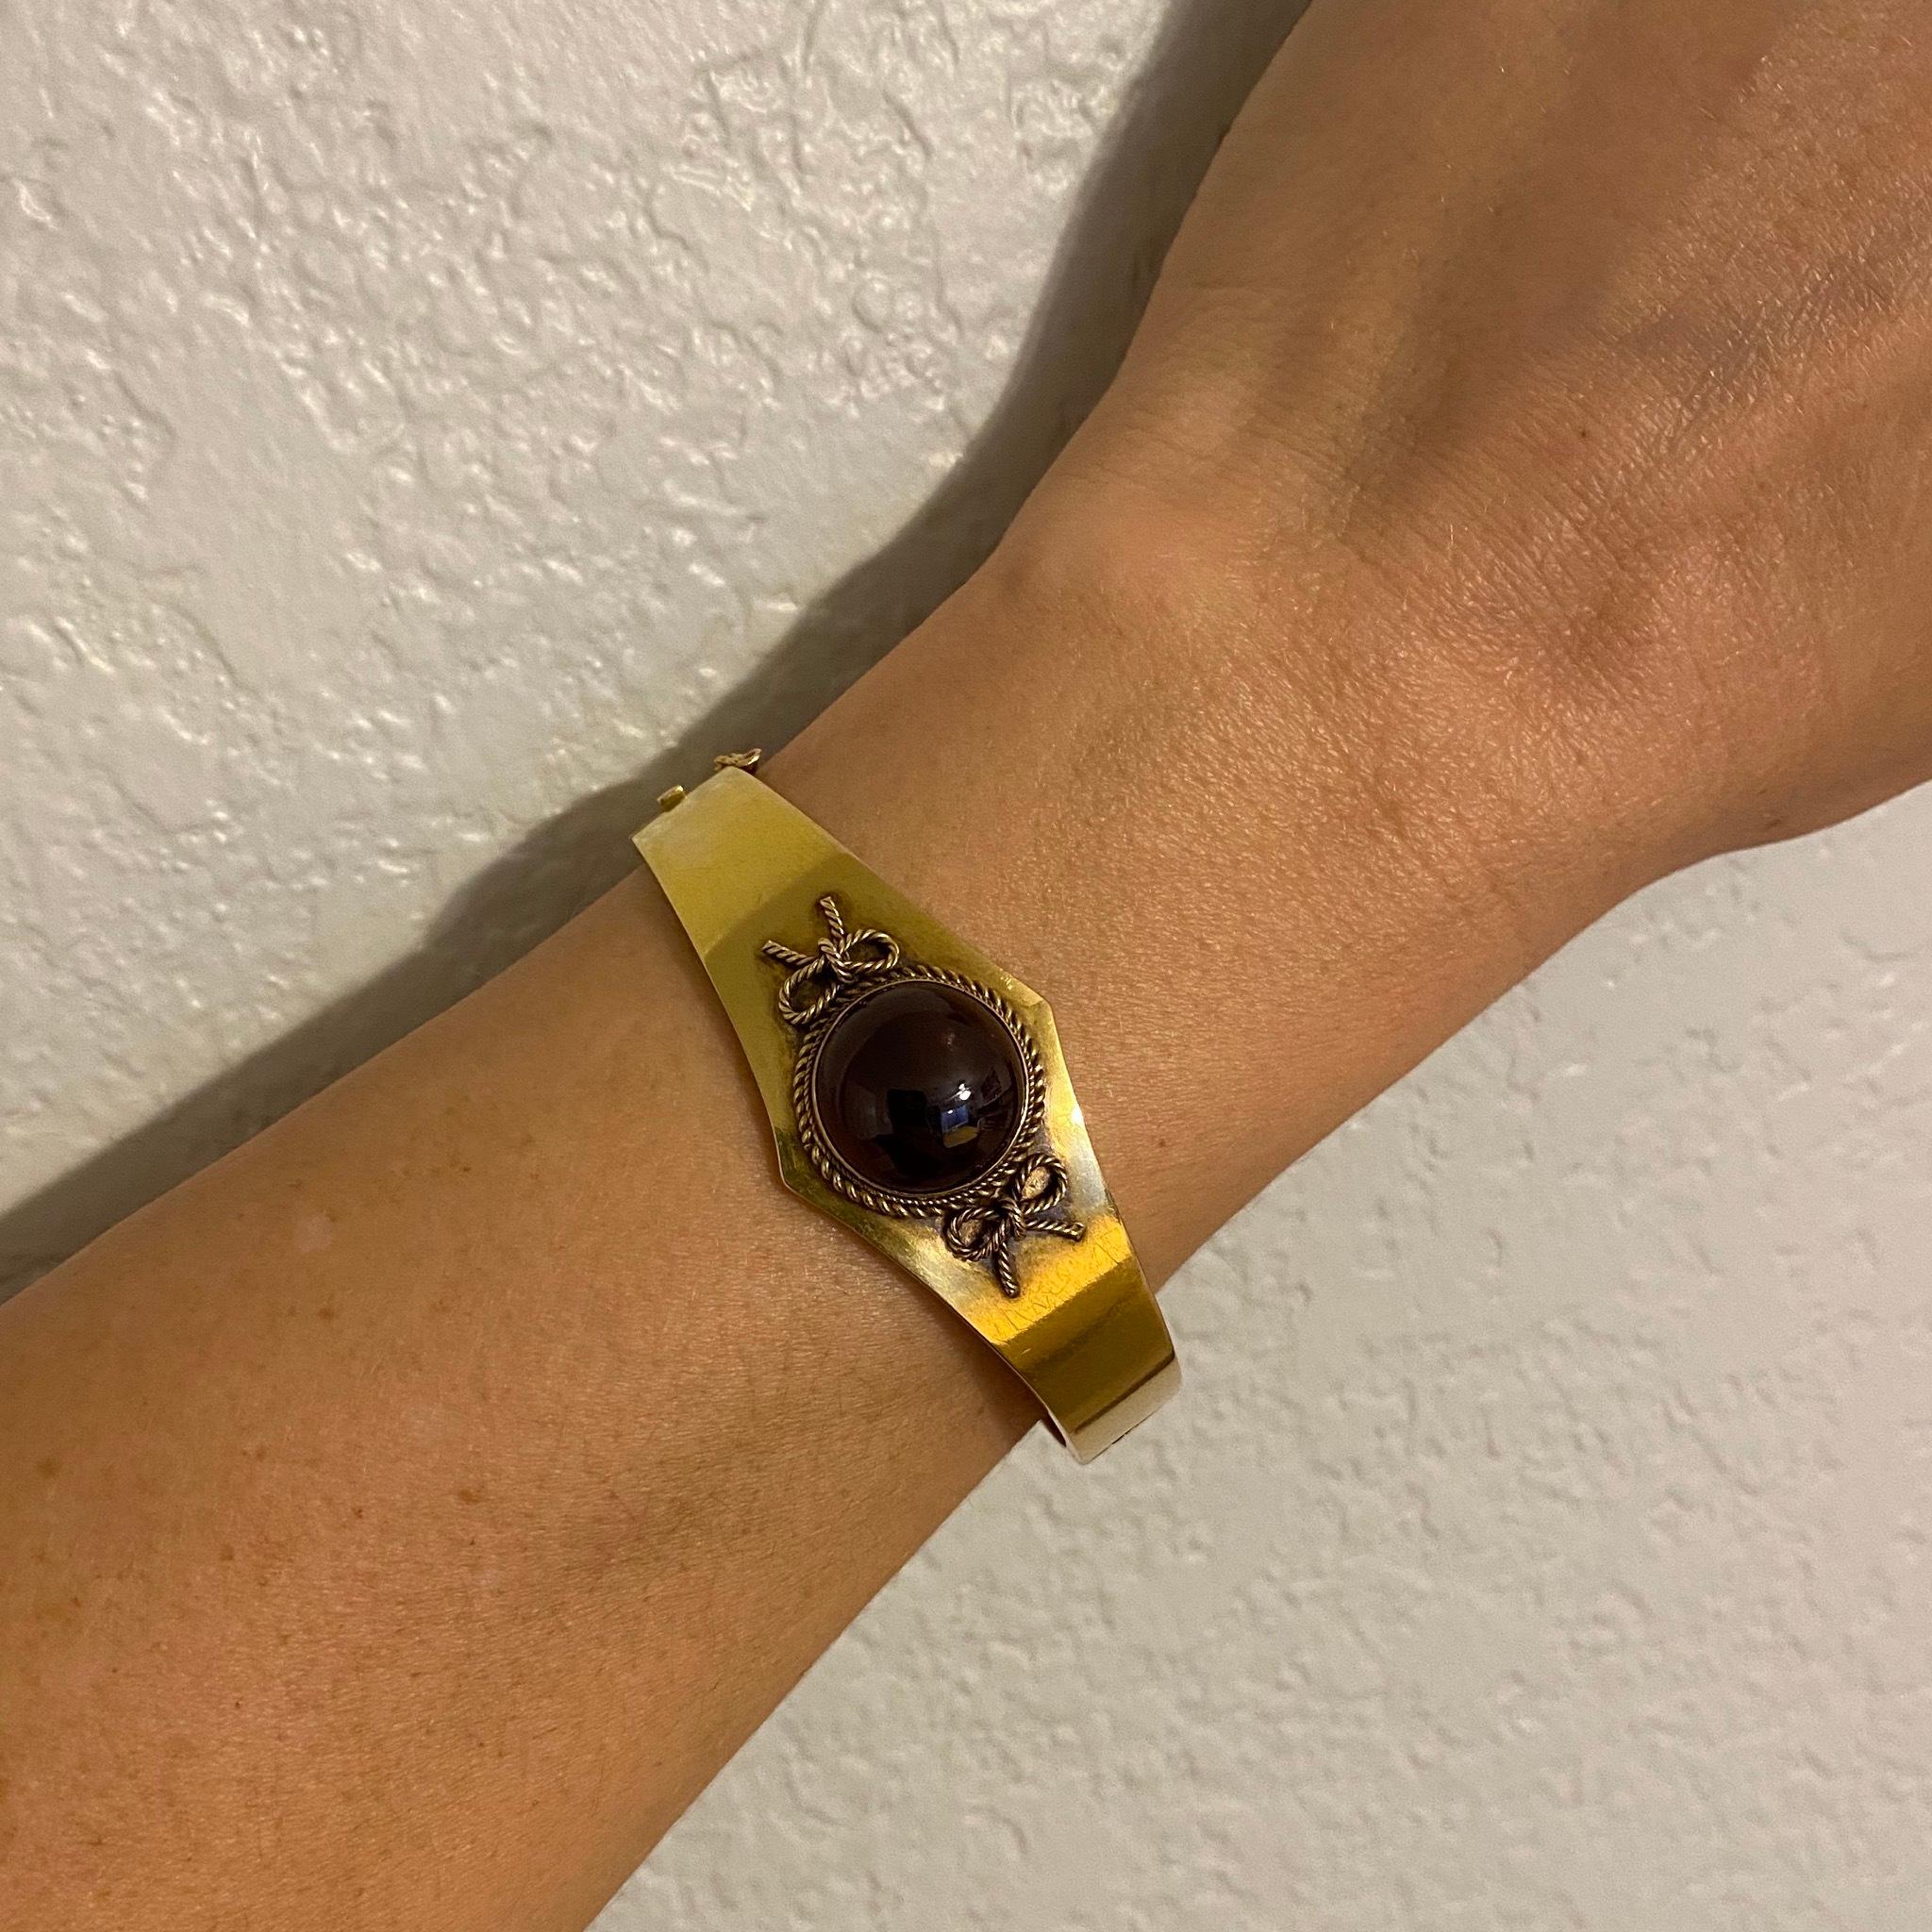 Simply Beautiful, Elegant and finely detailed Victorian Garnet Bangle Cuff Bracelet. Hand crafted in 18 Karat yellow Gold, center set with a cabochon Garnet, surrounded by twist rope bow design. Approx. dimensions: 2.5”w x 0.92”h x 1.4”d, inner cuff